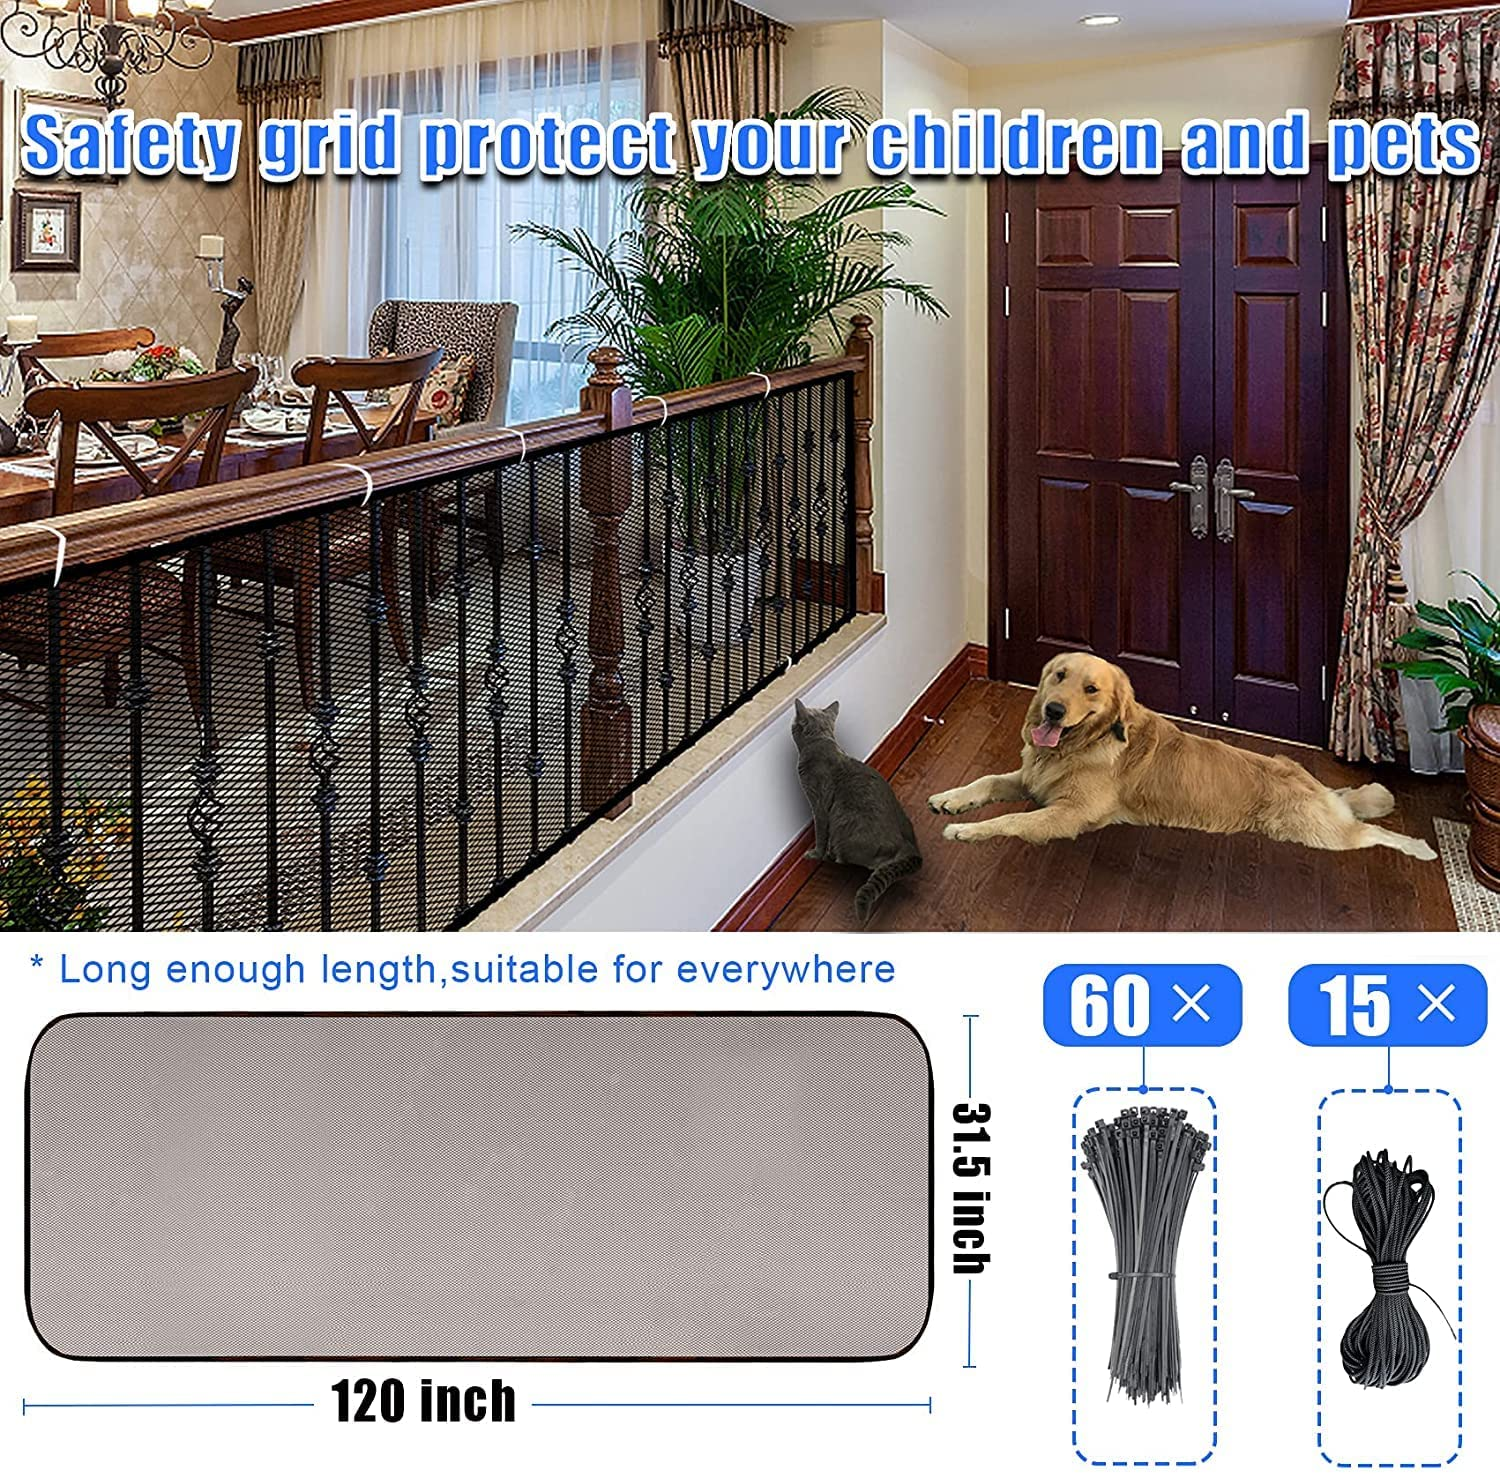 Baby Gate for Stairs, Banister Guard for Kids, Pets, Toys, 10Ft L X 2.66 Ft H, Mesh Netting Safety Net for Balcony Rail Stair, Stairway Net Baby Safety Products for Indoor & Outdoor